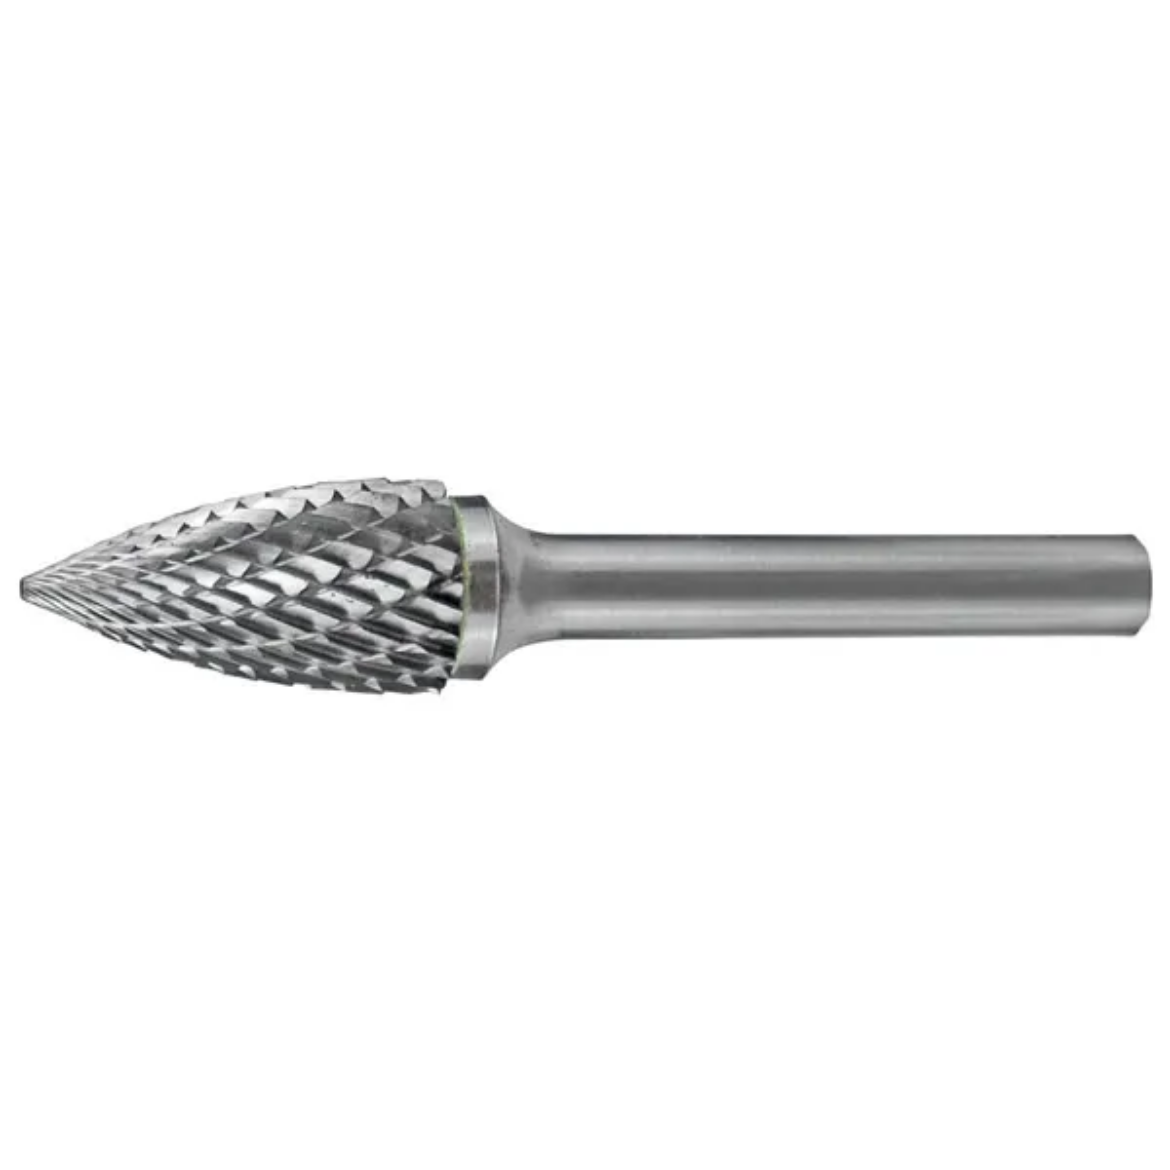 Picture of HOLEMAKER CARBIDE BURR, TREE SHAPE POINTED END 1/4" X 5/8" HEAD, 1/4" SHANK DC